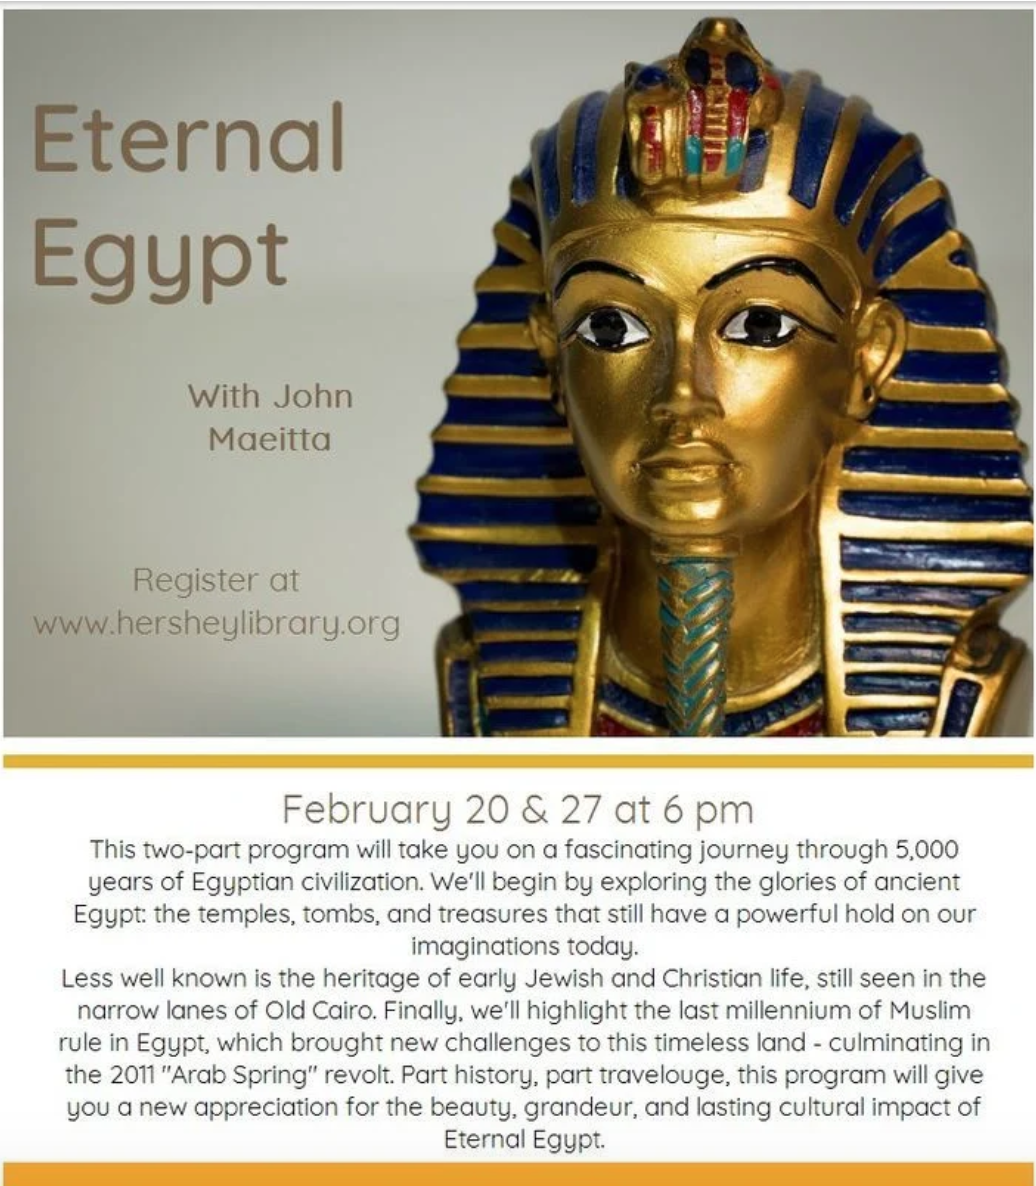 Eternal Egypt: From King Tut to the Arab Spring with John Maietta